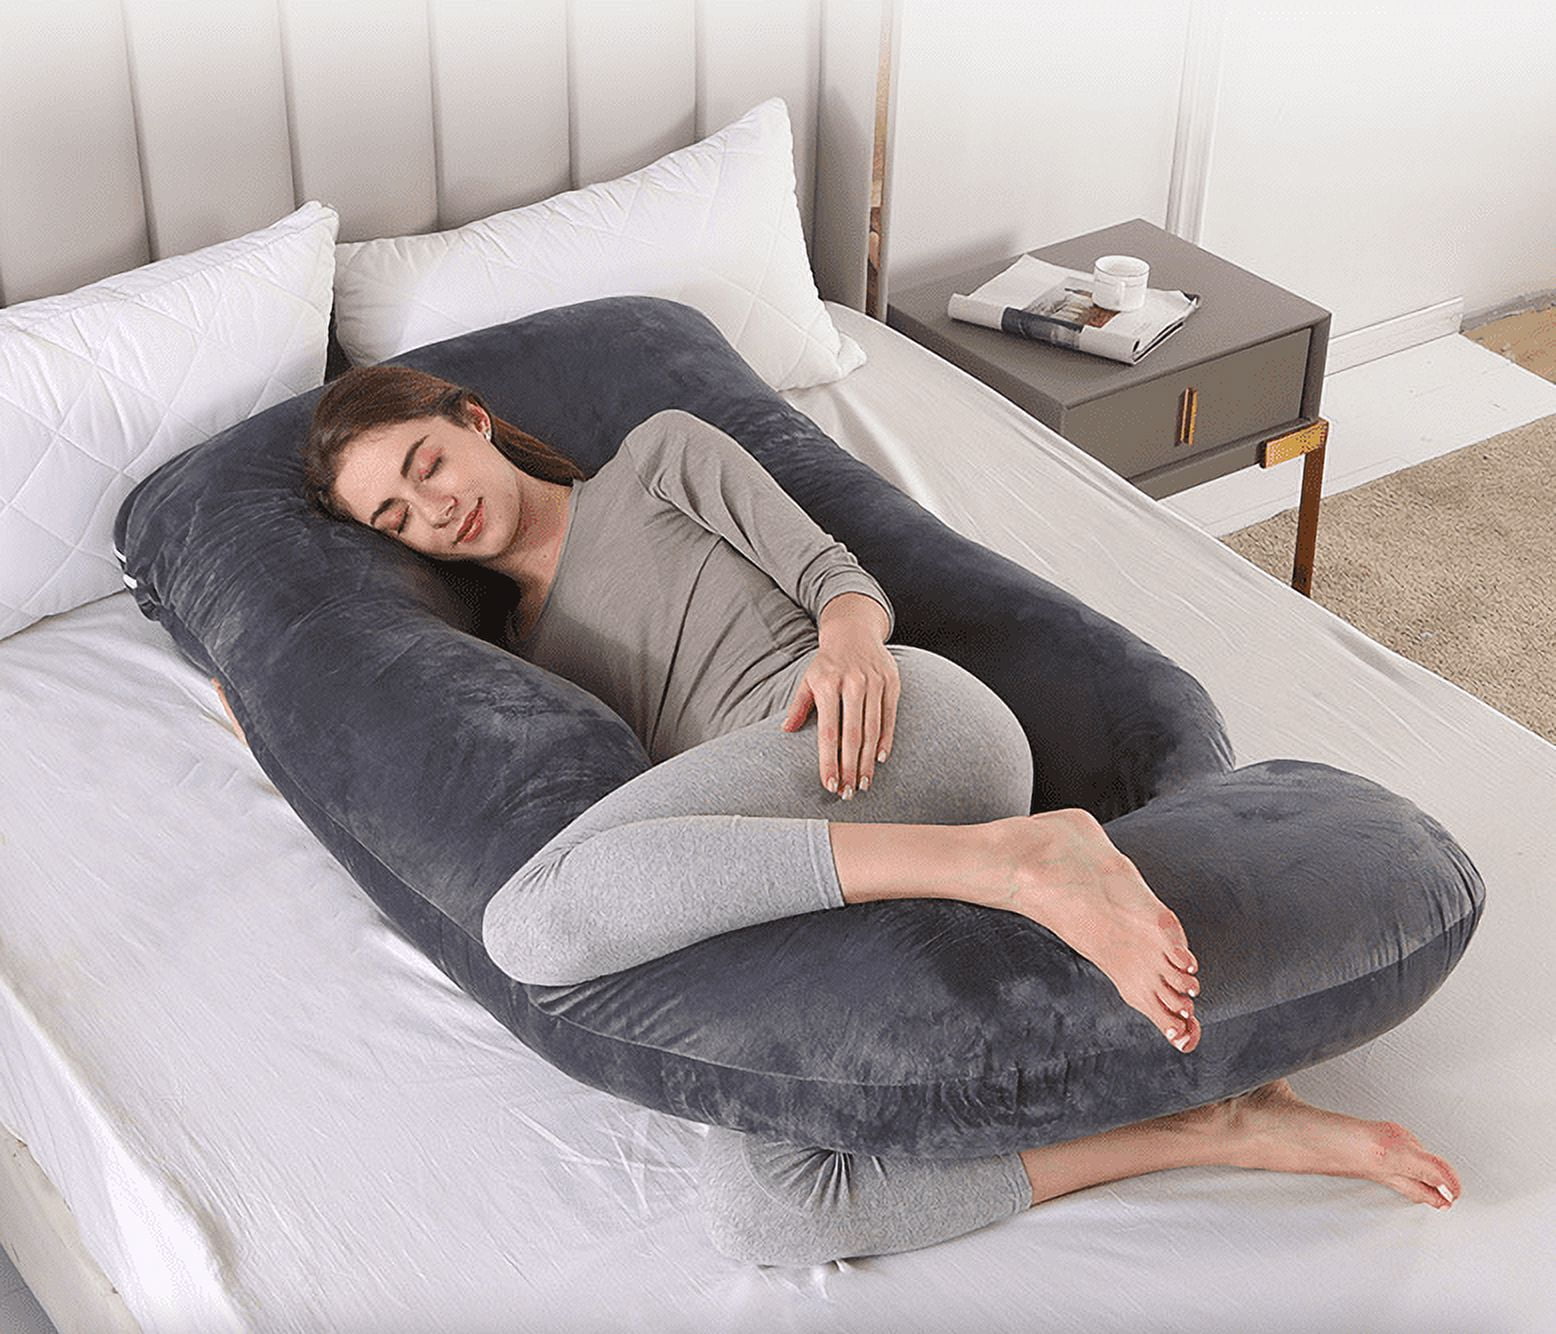 Bed Buddy Full Body Pillow and C-Shape Pregnancy Pillow - Maternity Support Pillow, Gray